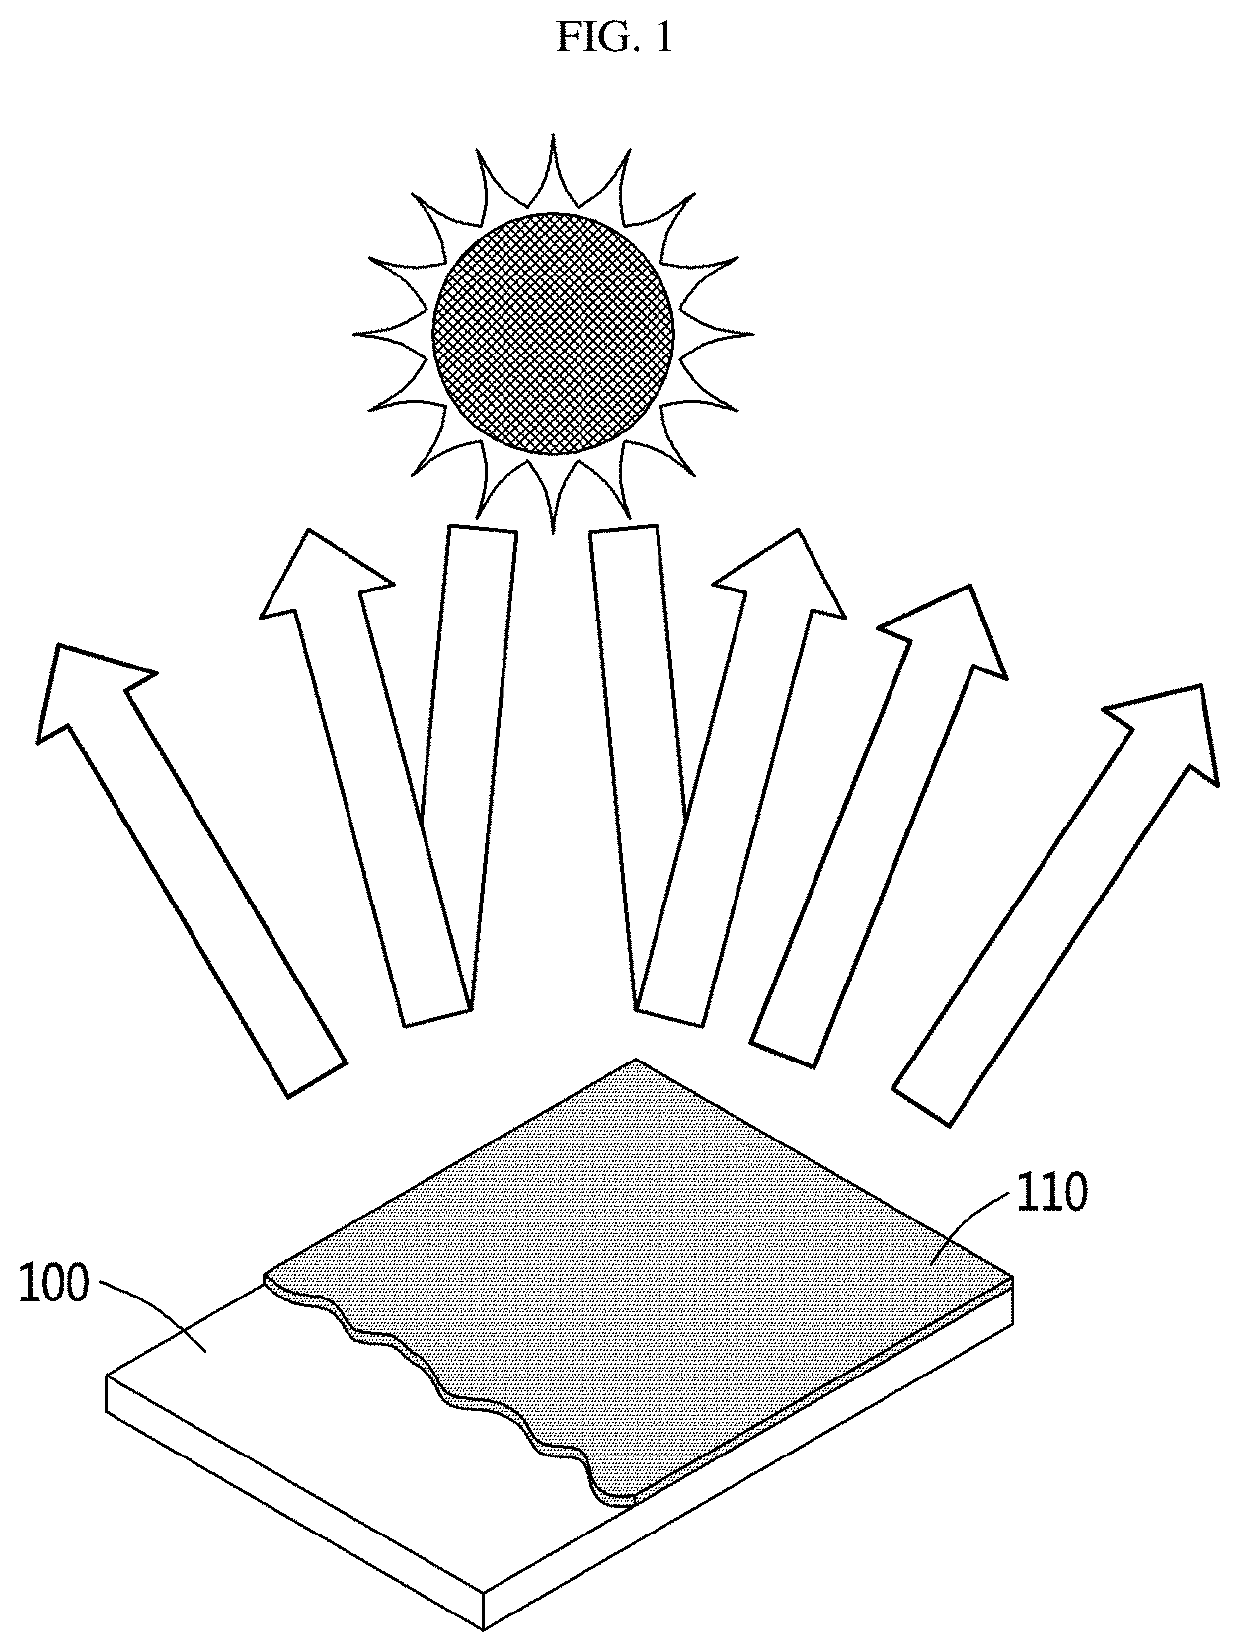 Radiative cooling device including paint coating layer composed of NANO or micro particles